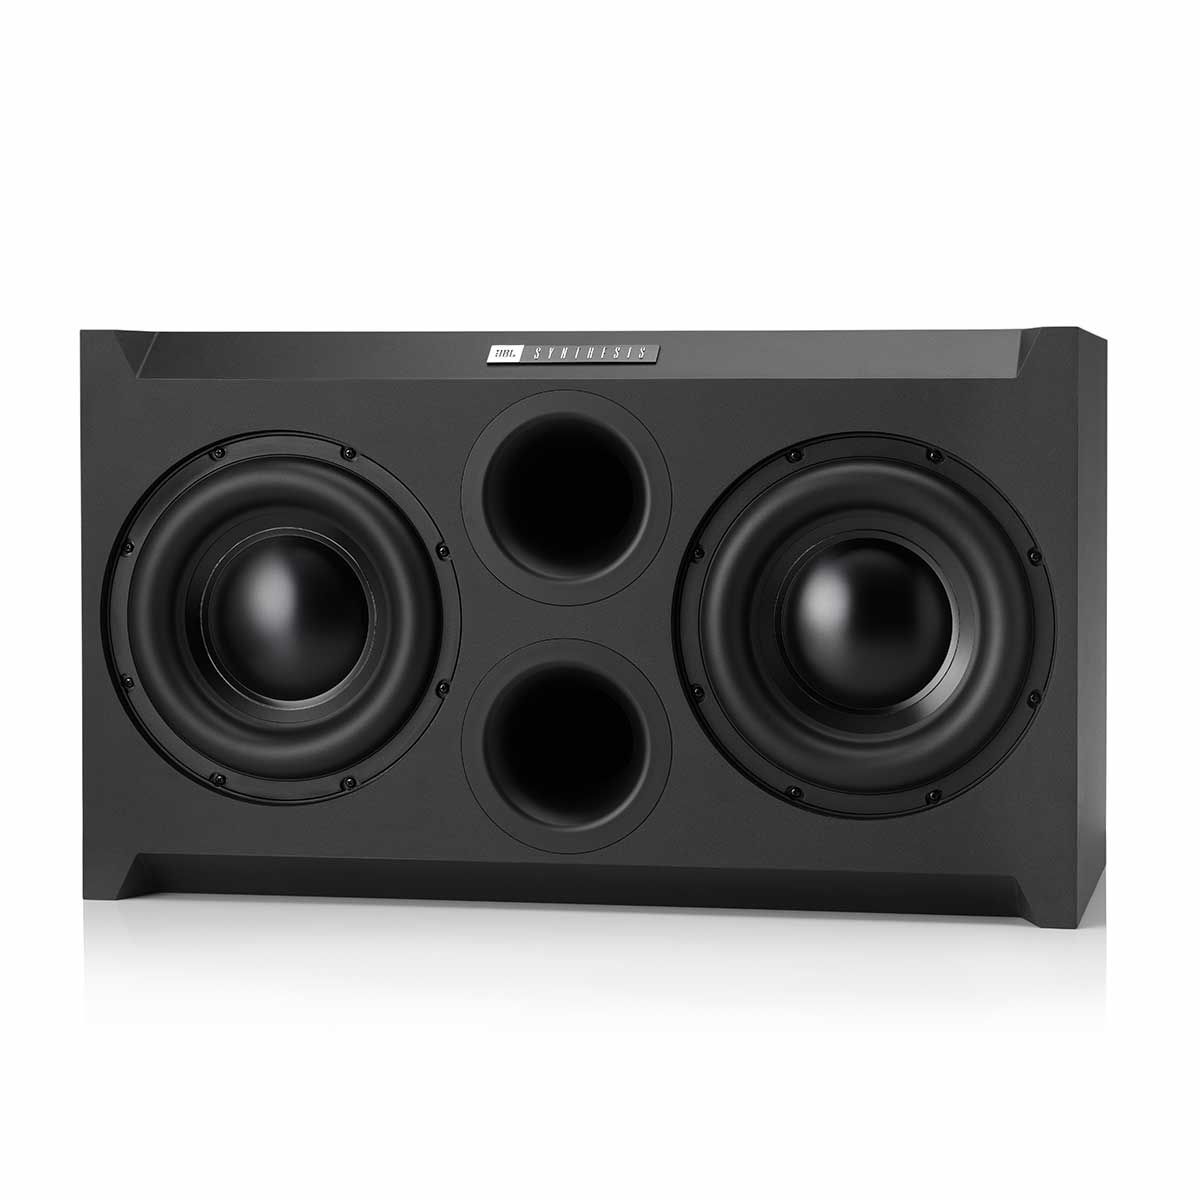 JBL Synthesis SSW-2 Dual Subwoofer, Black, front view